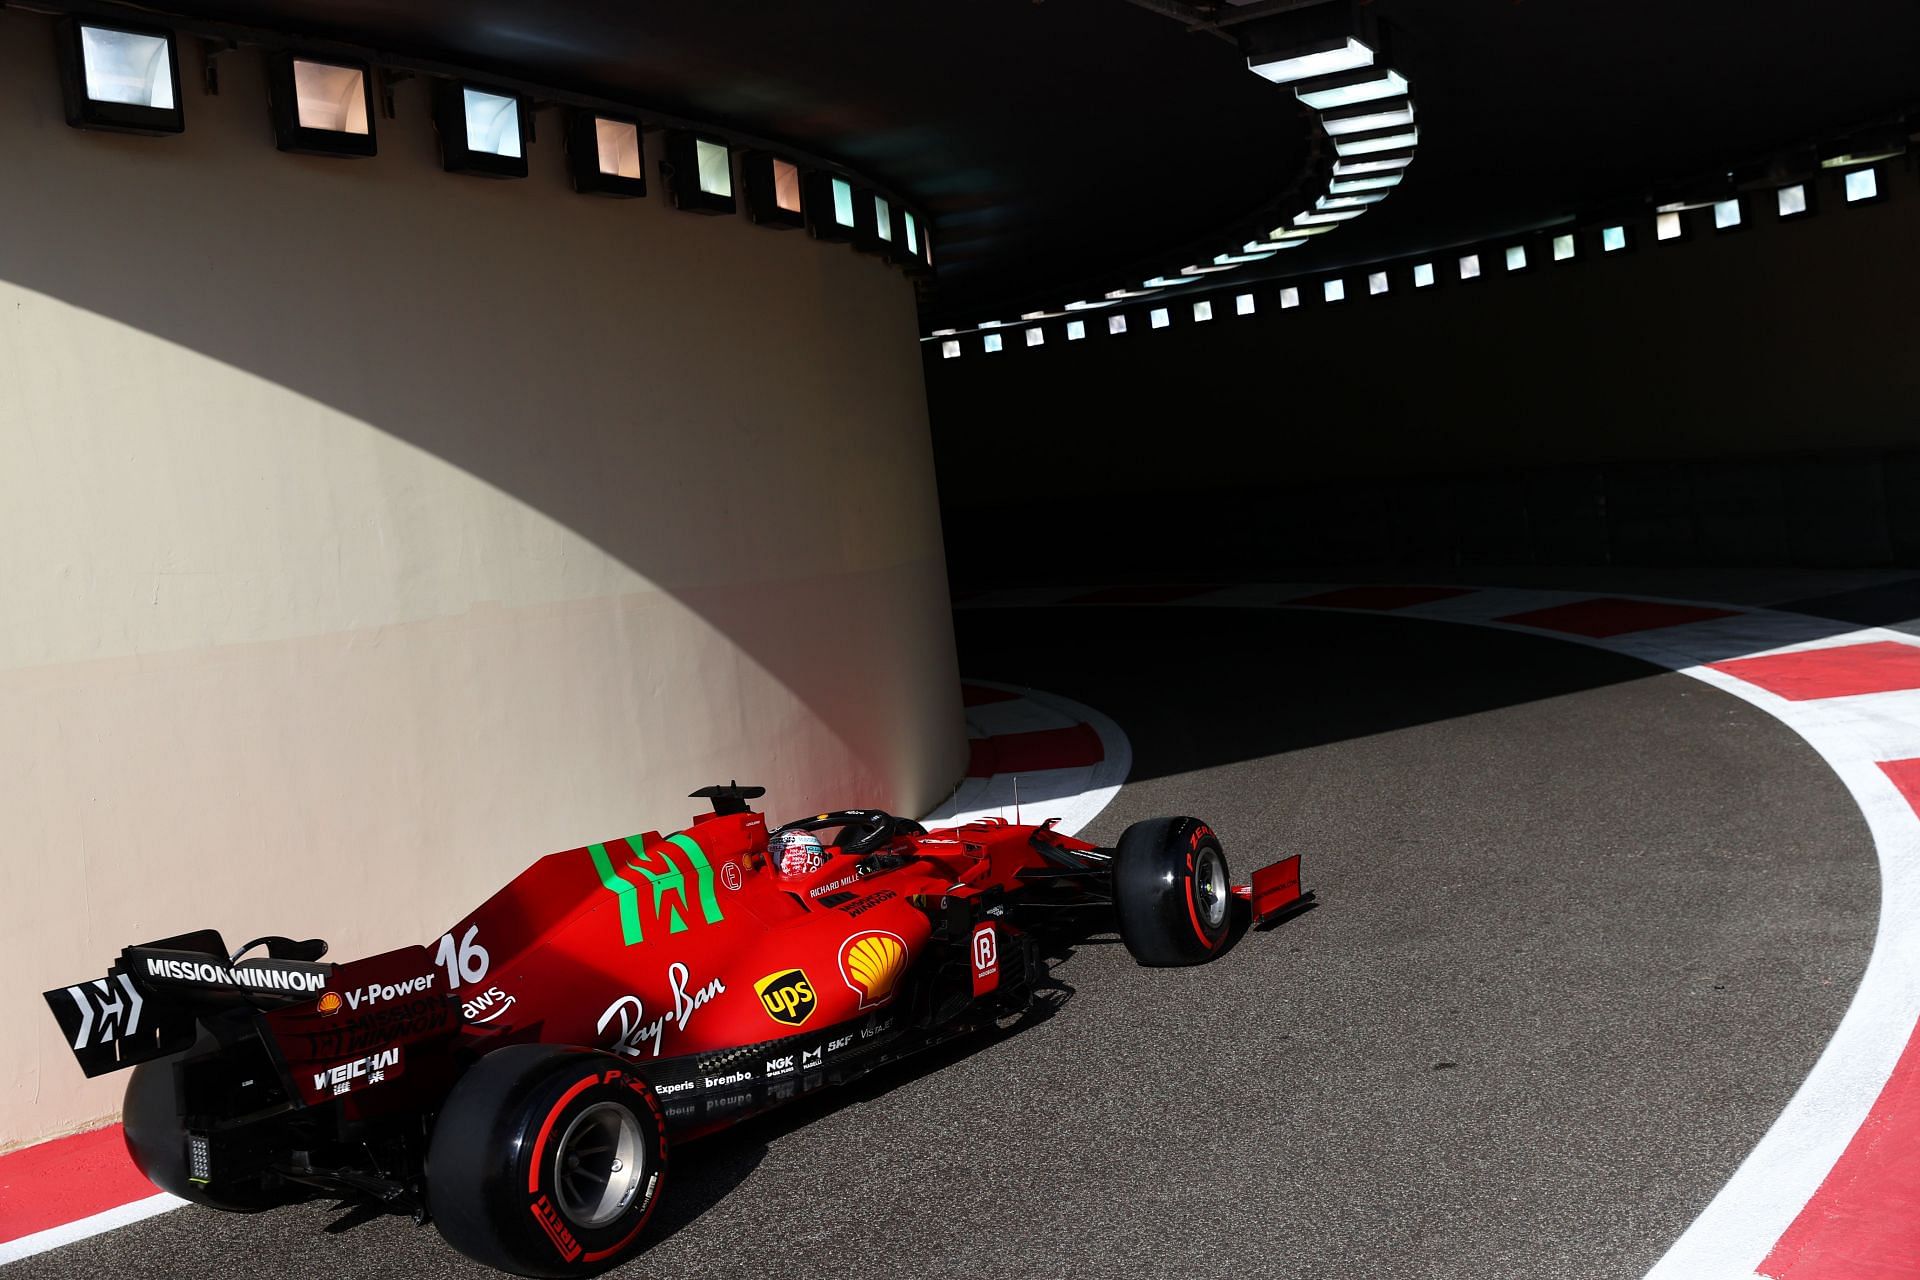 Leclerc during the 2021 Abu Dhabi GP in his Scuderia Ferrari SF21 (Photo by Clive Rose/Getty Images)